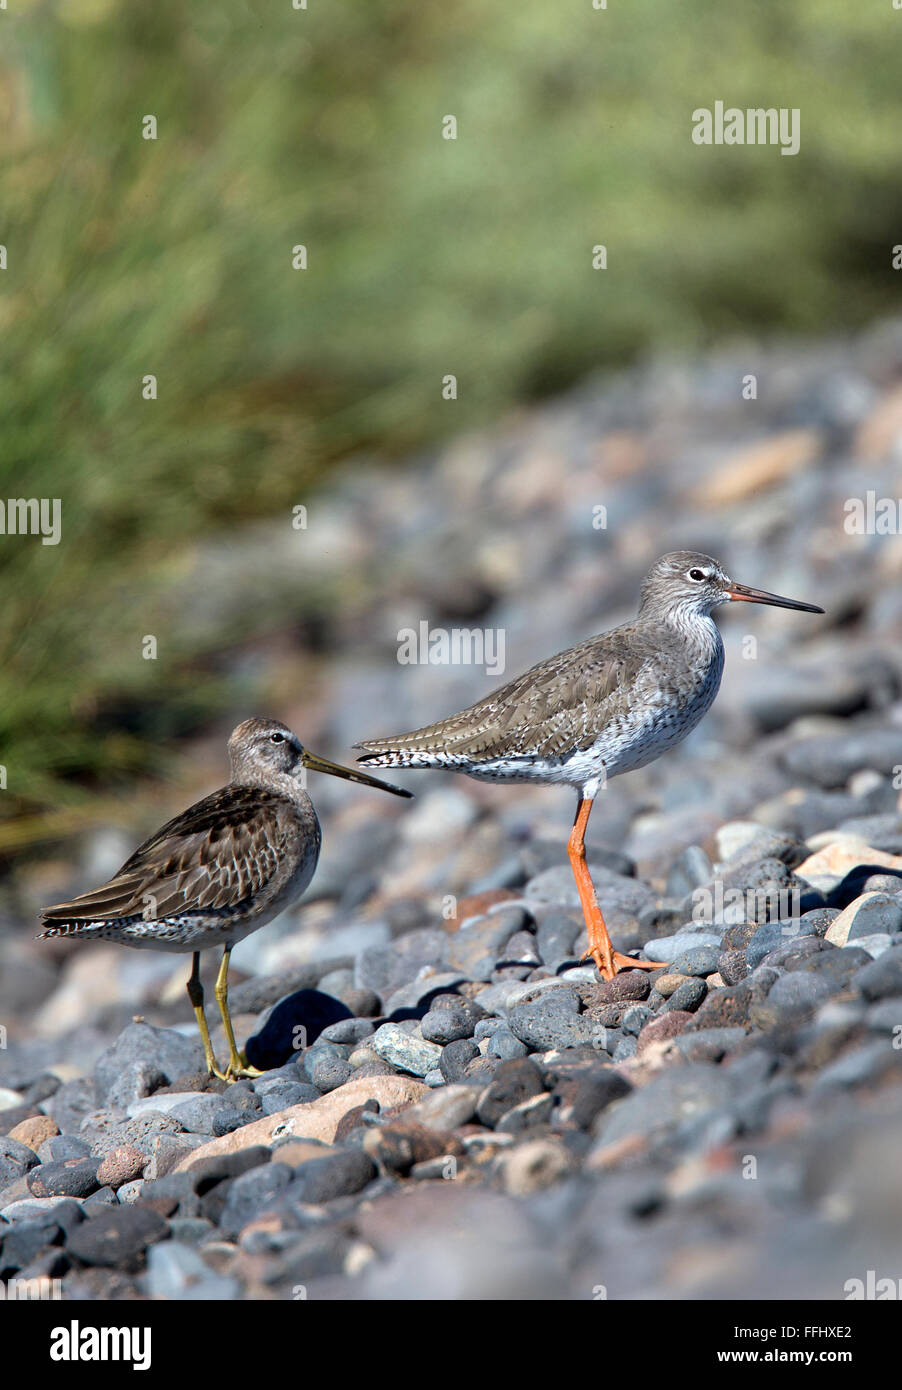 Common Redshank (Tringa totanus) and a Long-billed Dowitcher (a rare vagrant, Limnodromus scolopaceus), Tenerife, Canary Islands Stock Photo